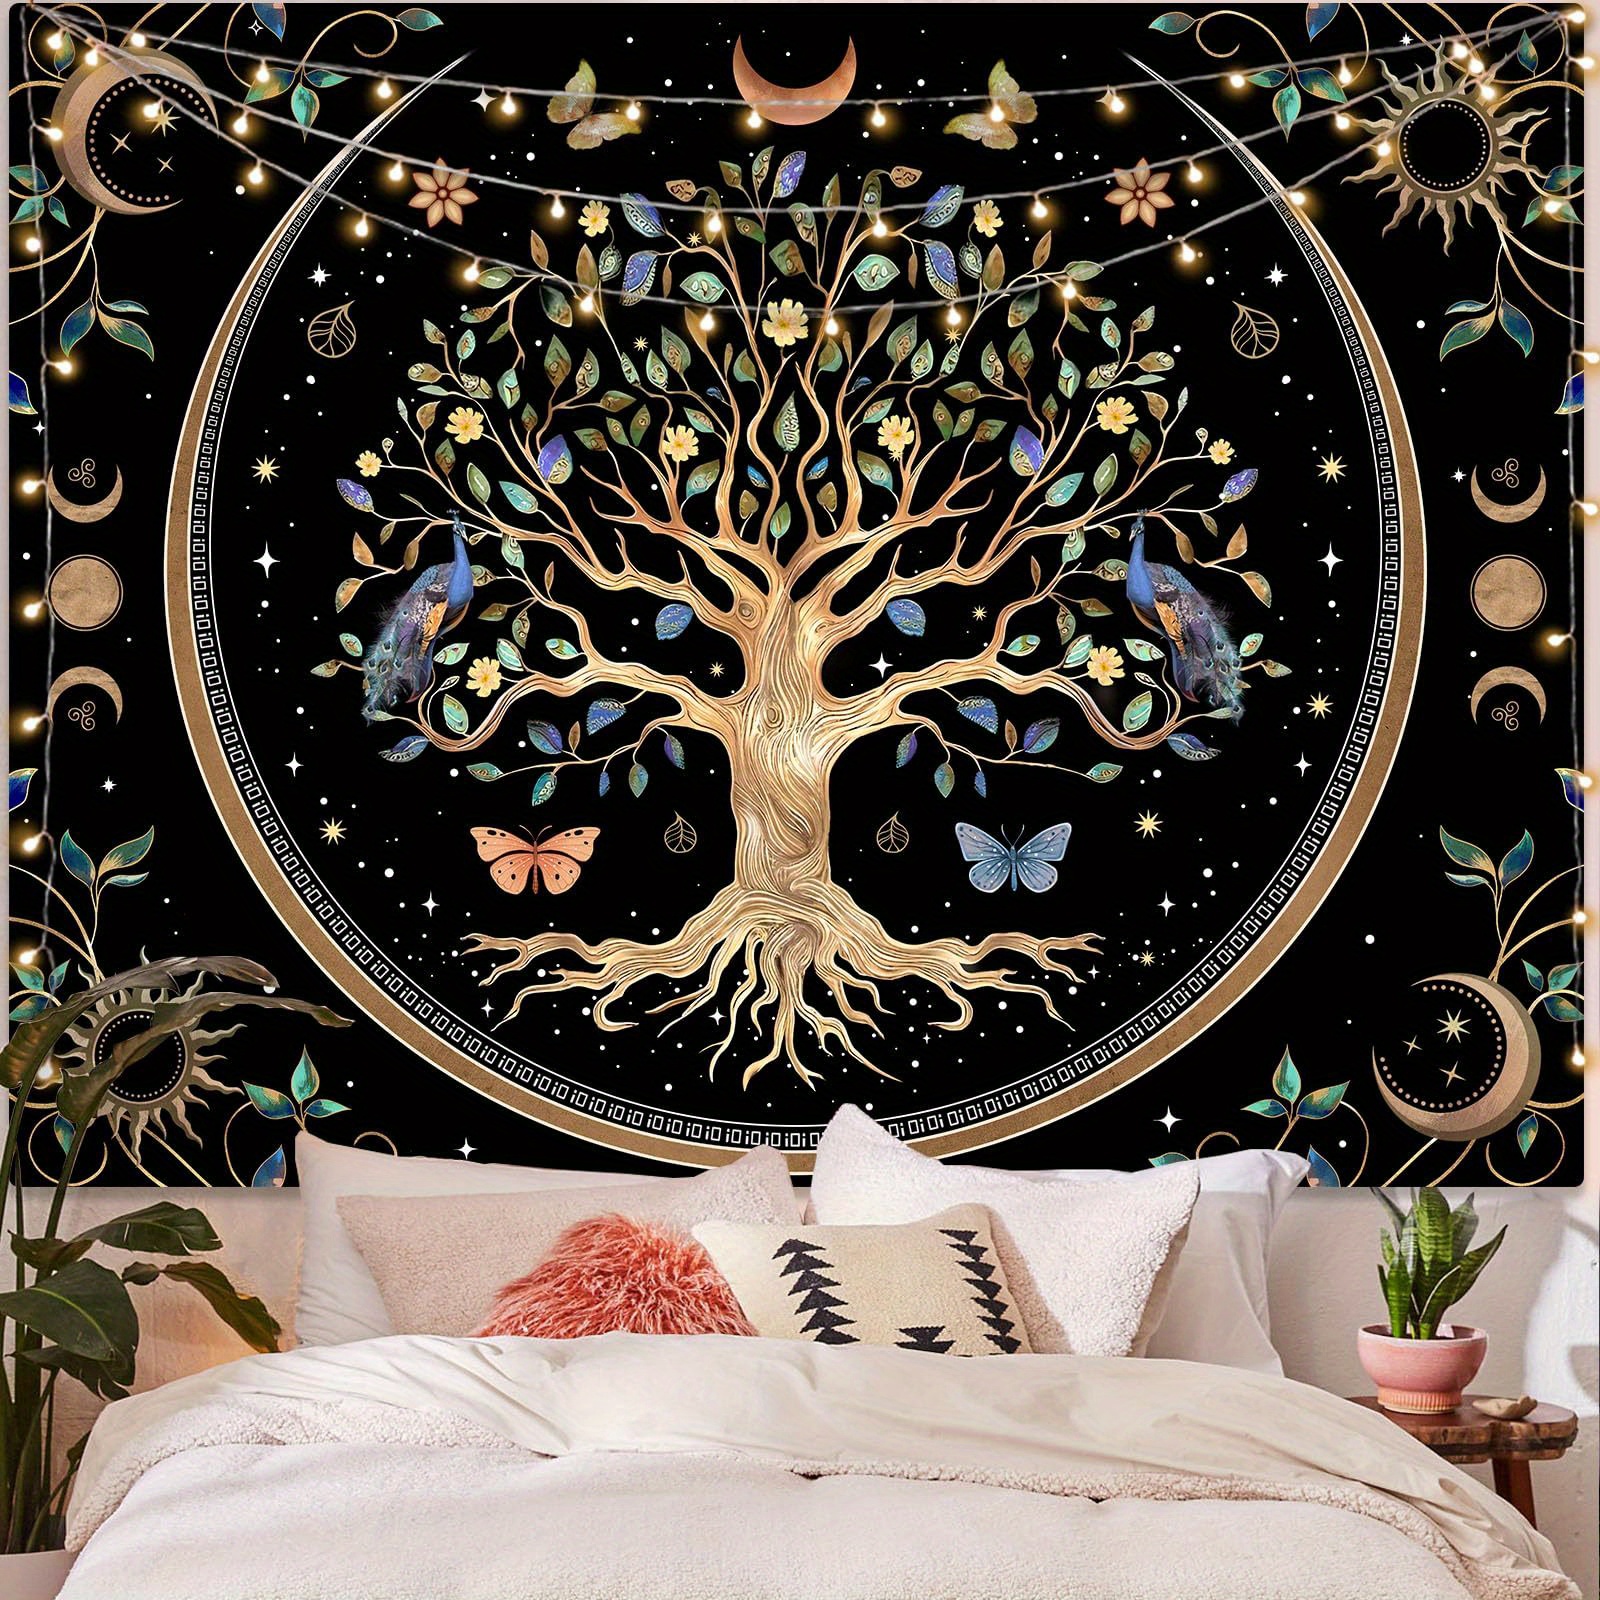 

1pc, Tree Of Life Tapastry Moon Tapestry Butterfly Tapestries For Bedroom Aesthetic Tapastry's Wall Hanging Mandala Botanical Tapestry For Home Decor Bedroom Living Room Dorm Decor Wall Art Gift